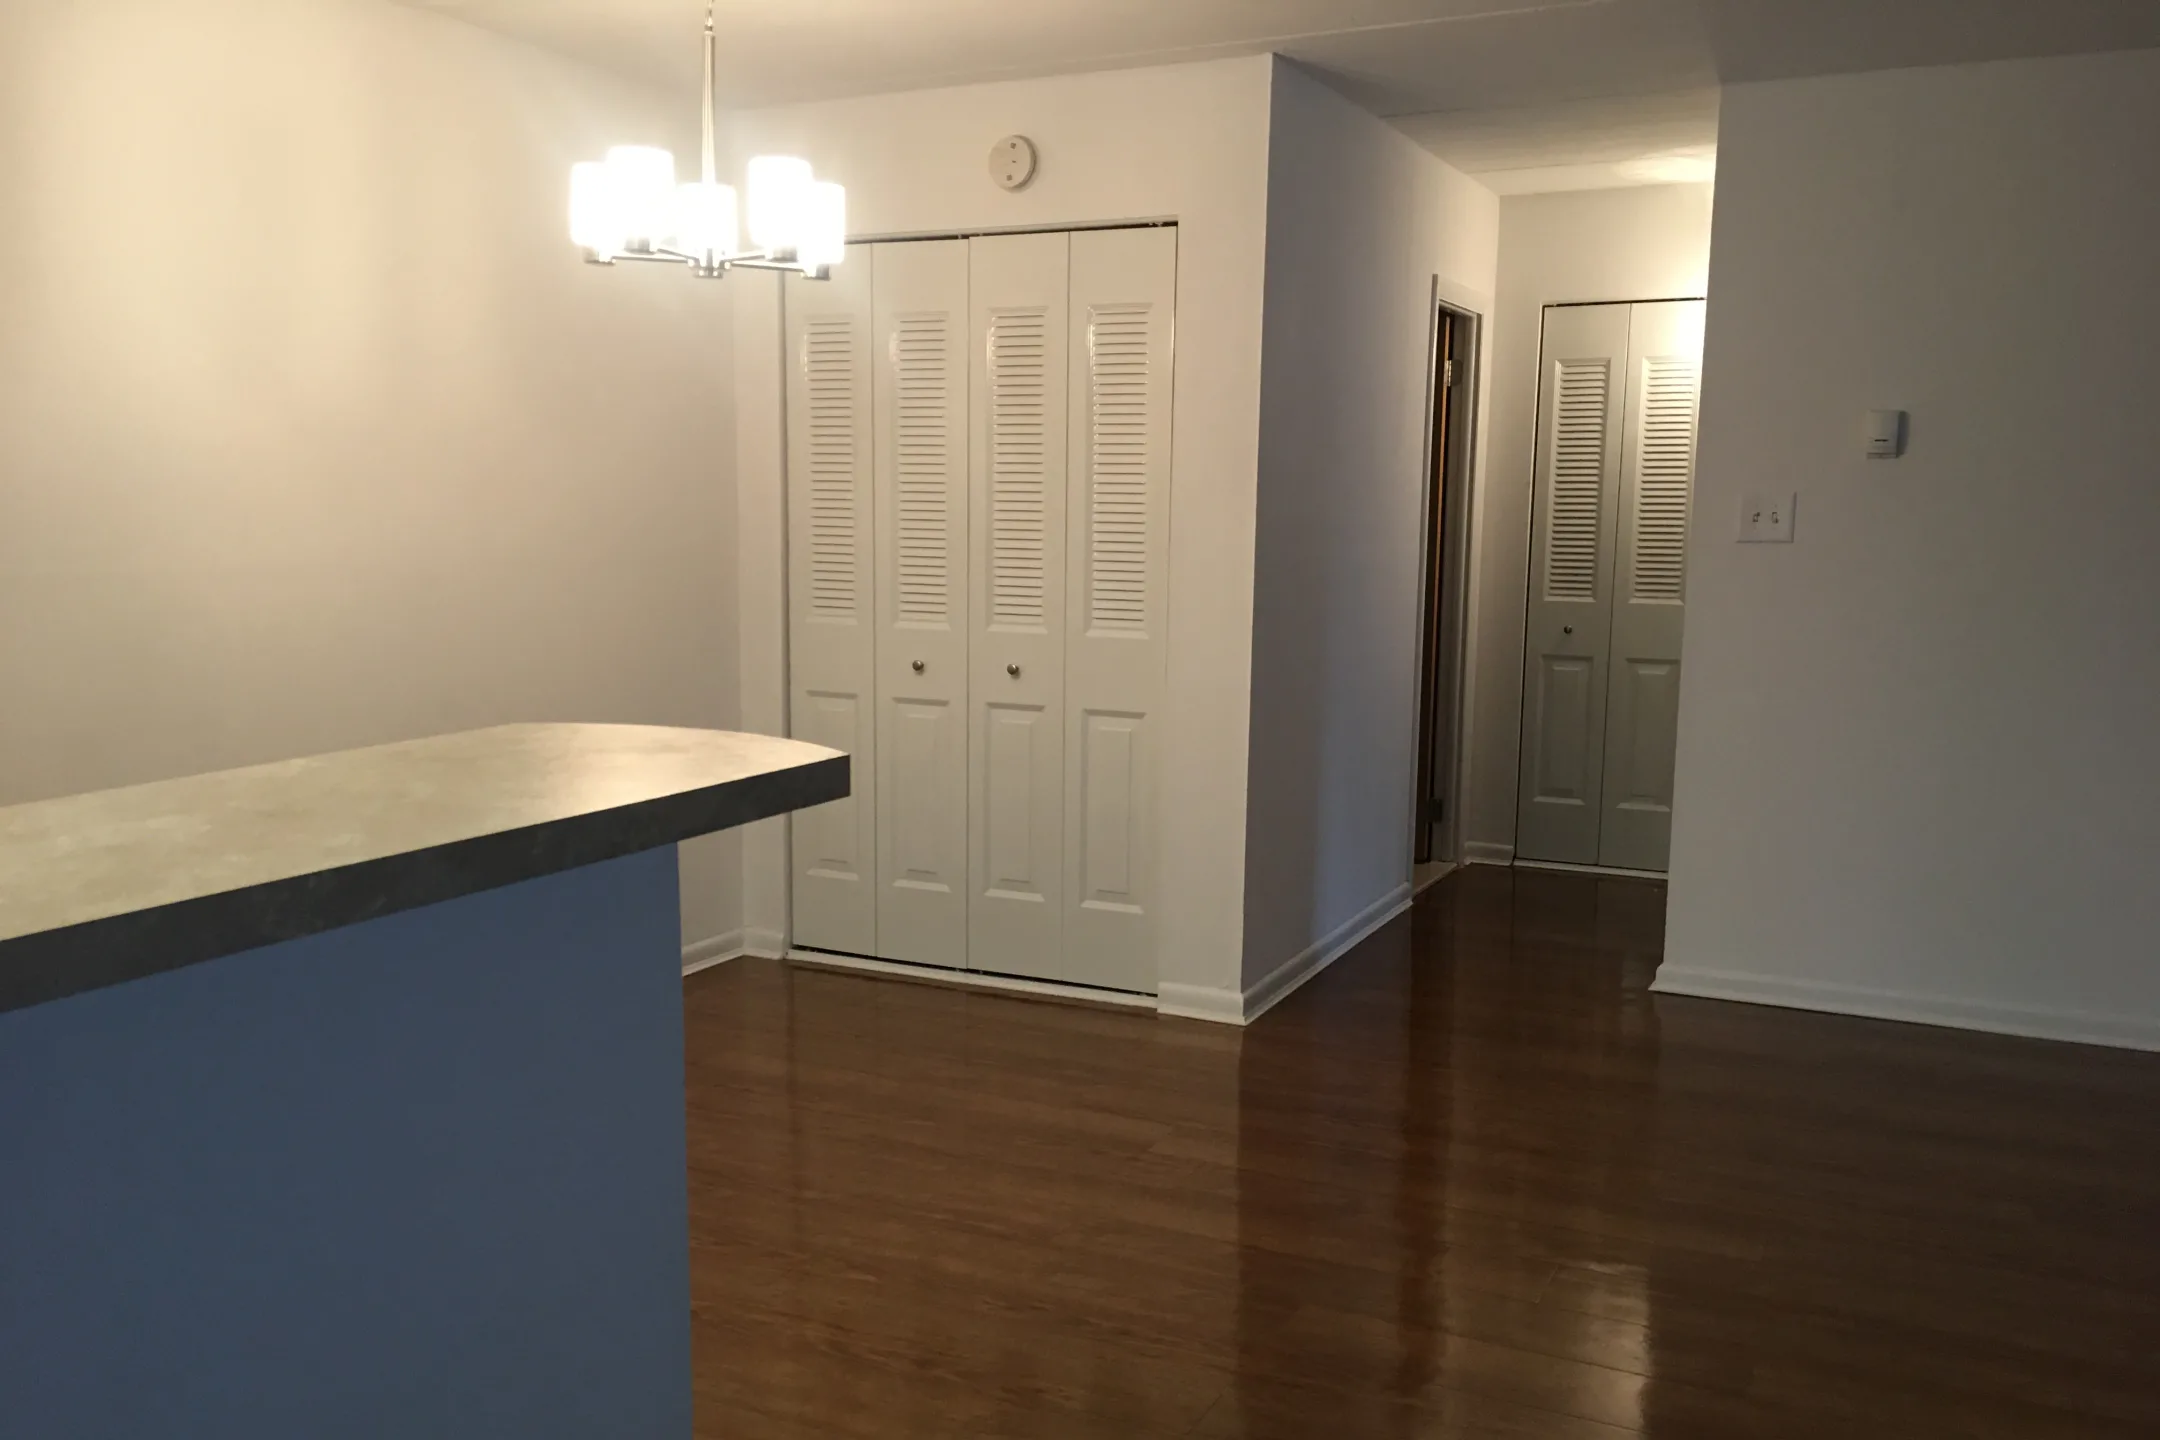 Dining Room - Bridgewater Apartments - Brookhaven, PA